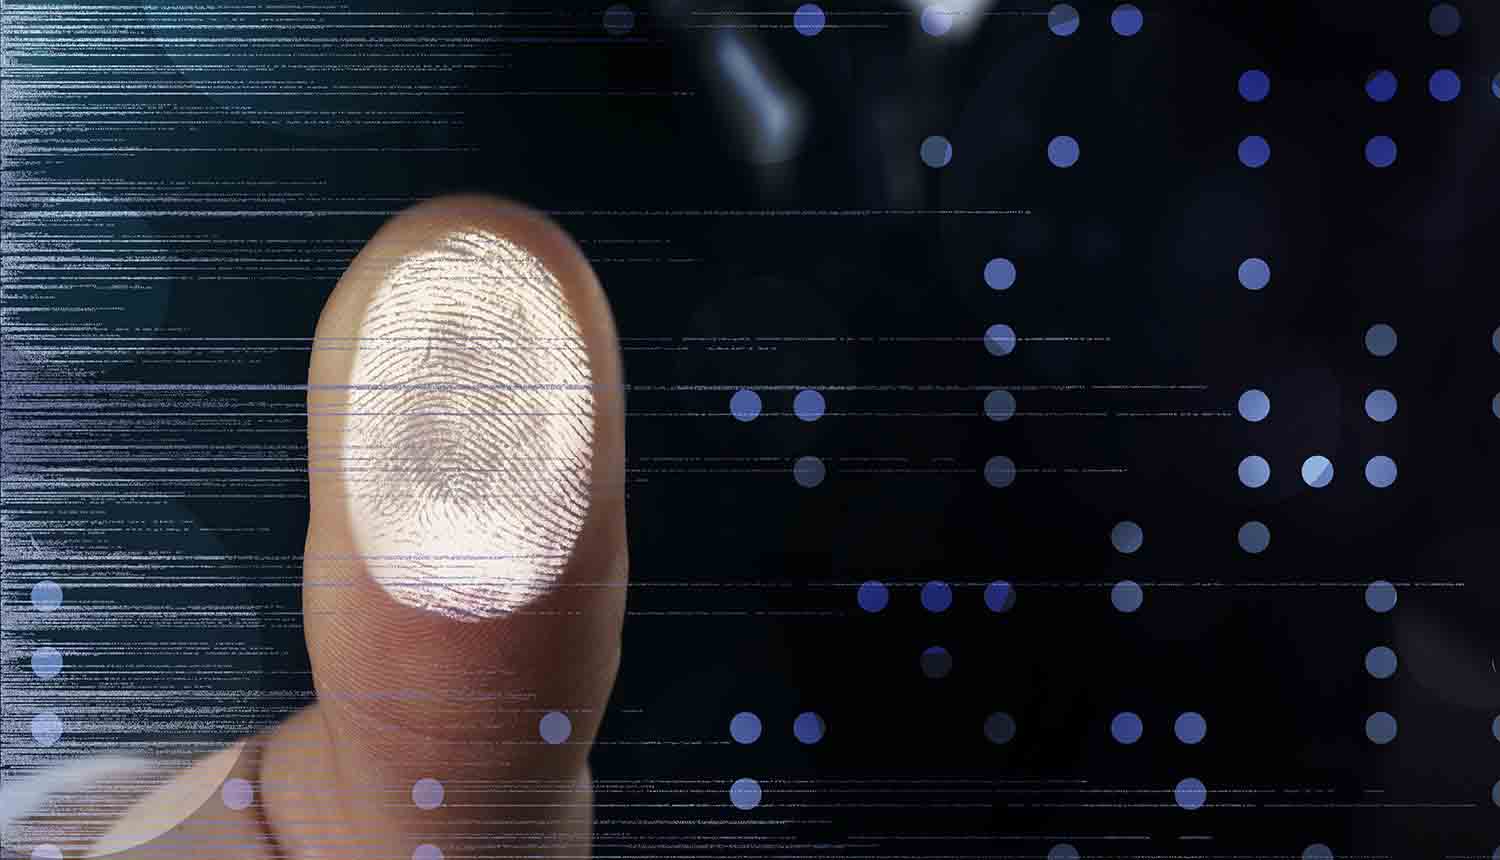 Fingerprints Classification Using Machine Learning and Image Analysis